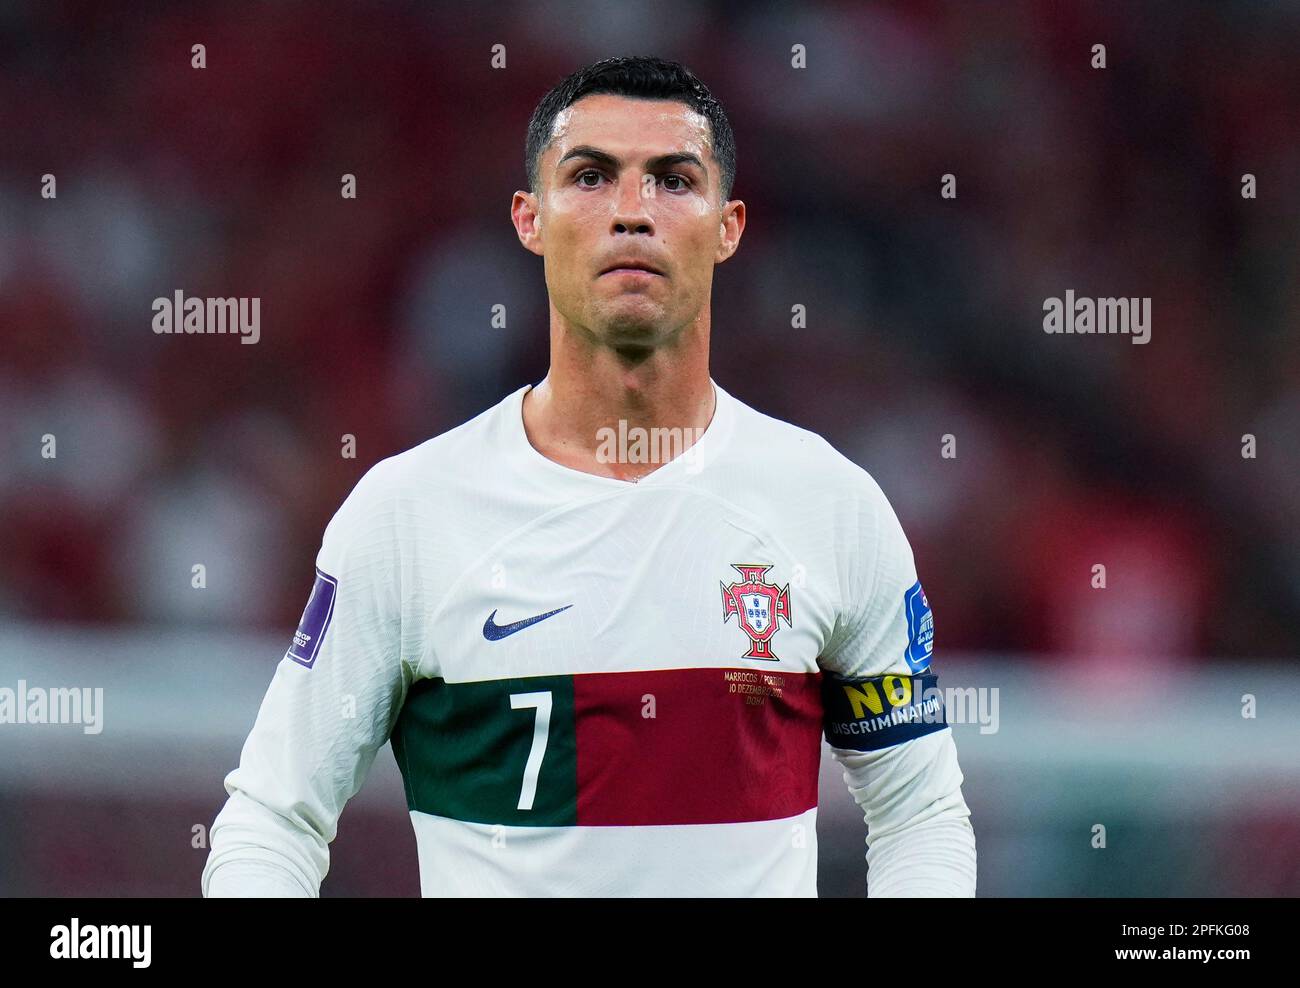 FILE - Portugal's Cristiano Ronaldo pauses during the World Cup  quarterfinal soccer match between Morocco and Portugal in Doha, Qatar, Dec.  10, 2022. New Portugal coach Roberto Martínez included Cristiano Ronaldo on